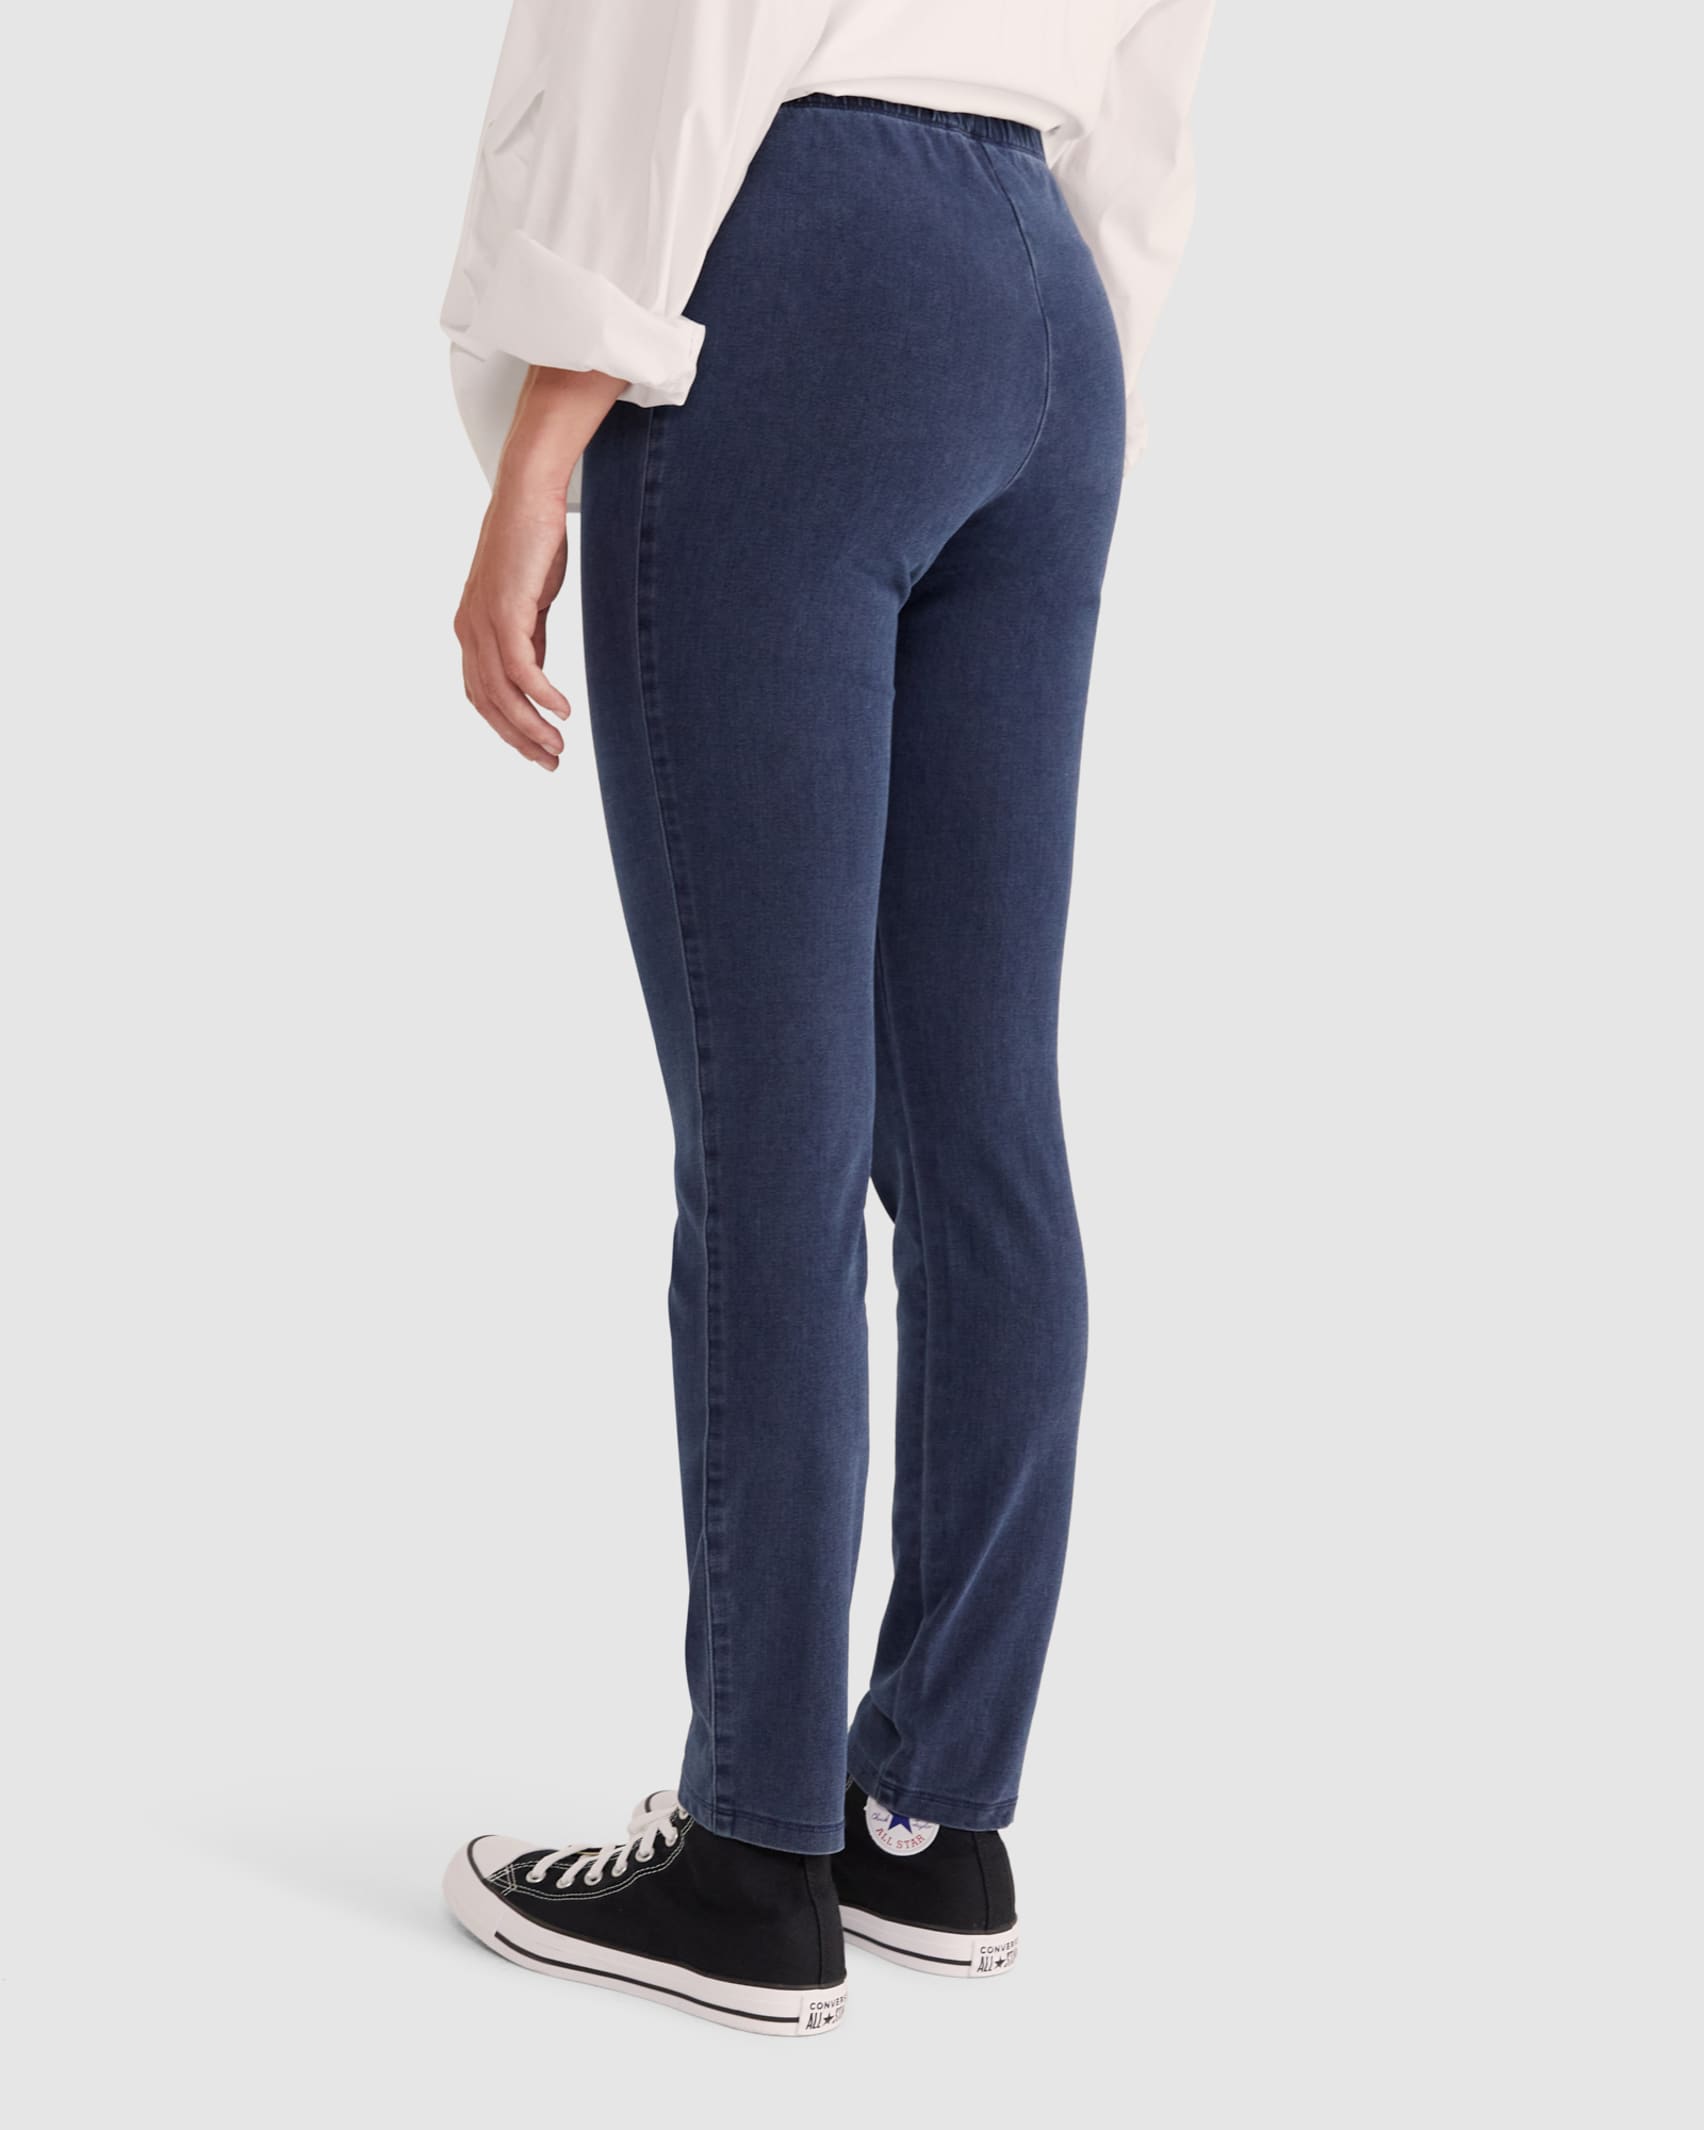 Felicity Denim Pull On Pant in MID WASH